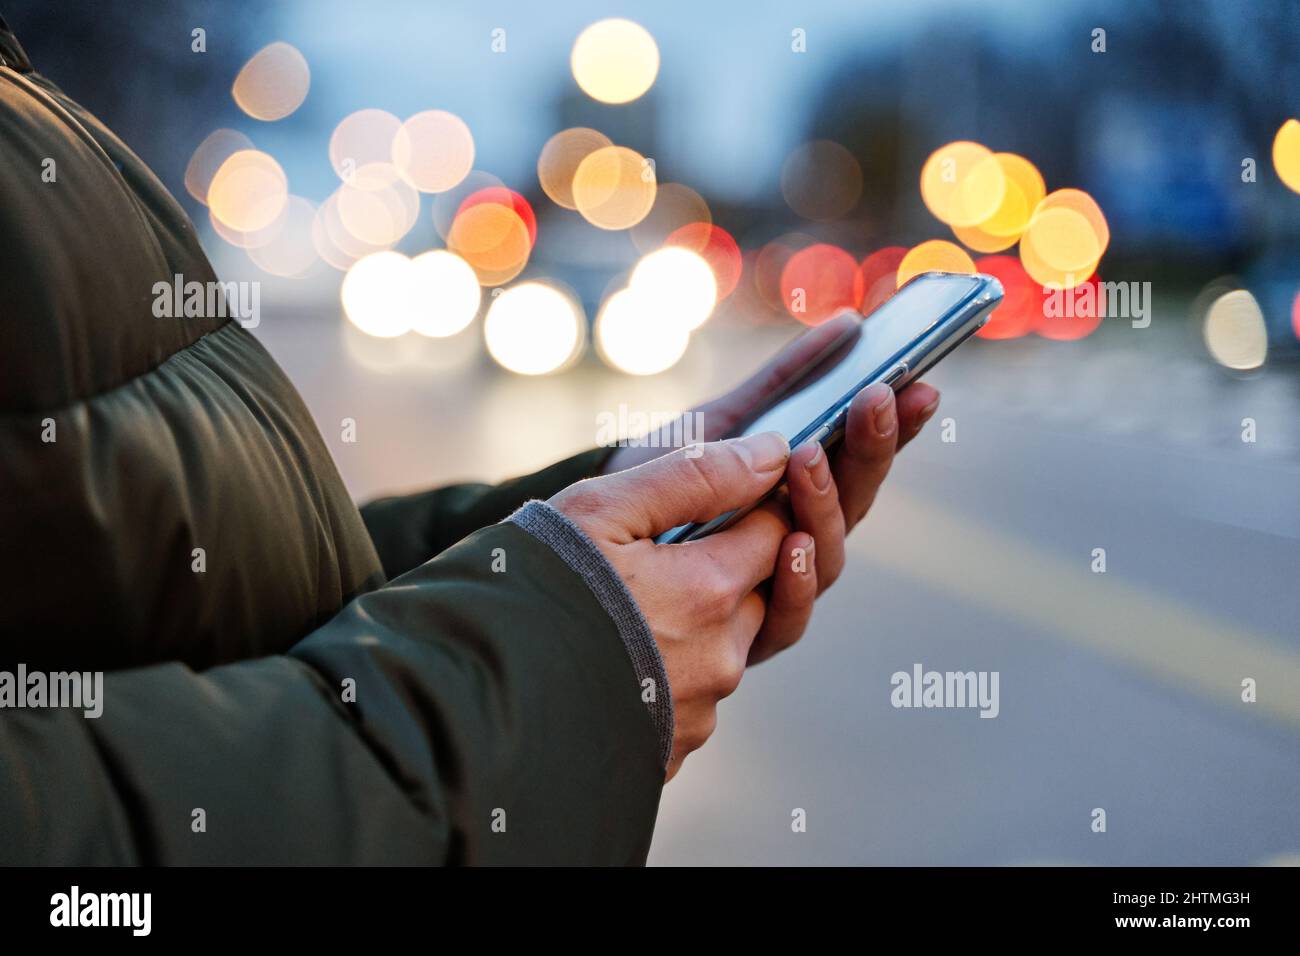 Close-up image of a woman's hands using smartphone at night on the city street, search or social networking concept, Stock Photo